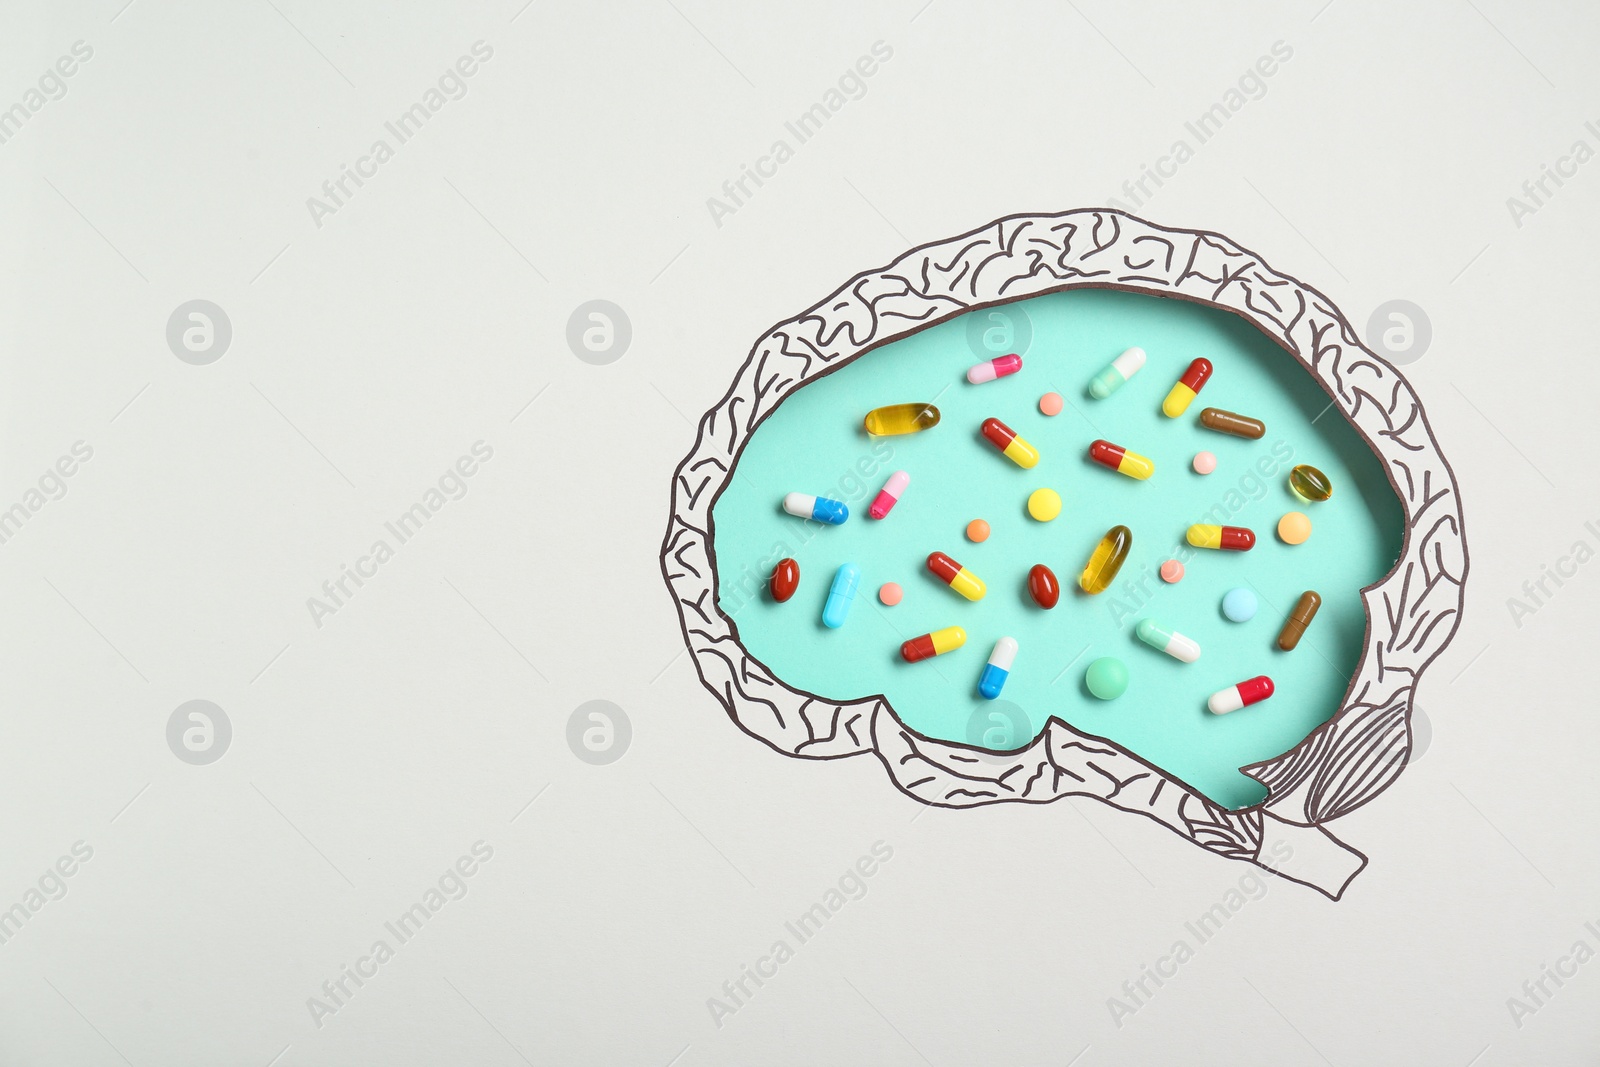 Photo of Pills on turquoise background, top view through paper with brain shaped hole and drawing. Space for text